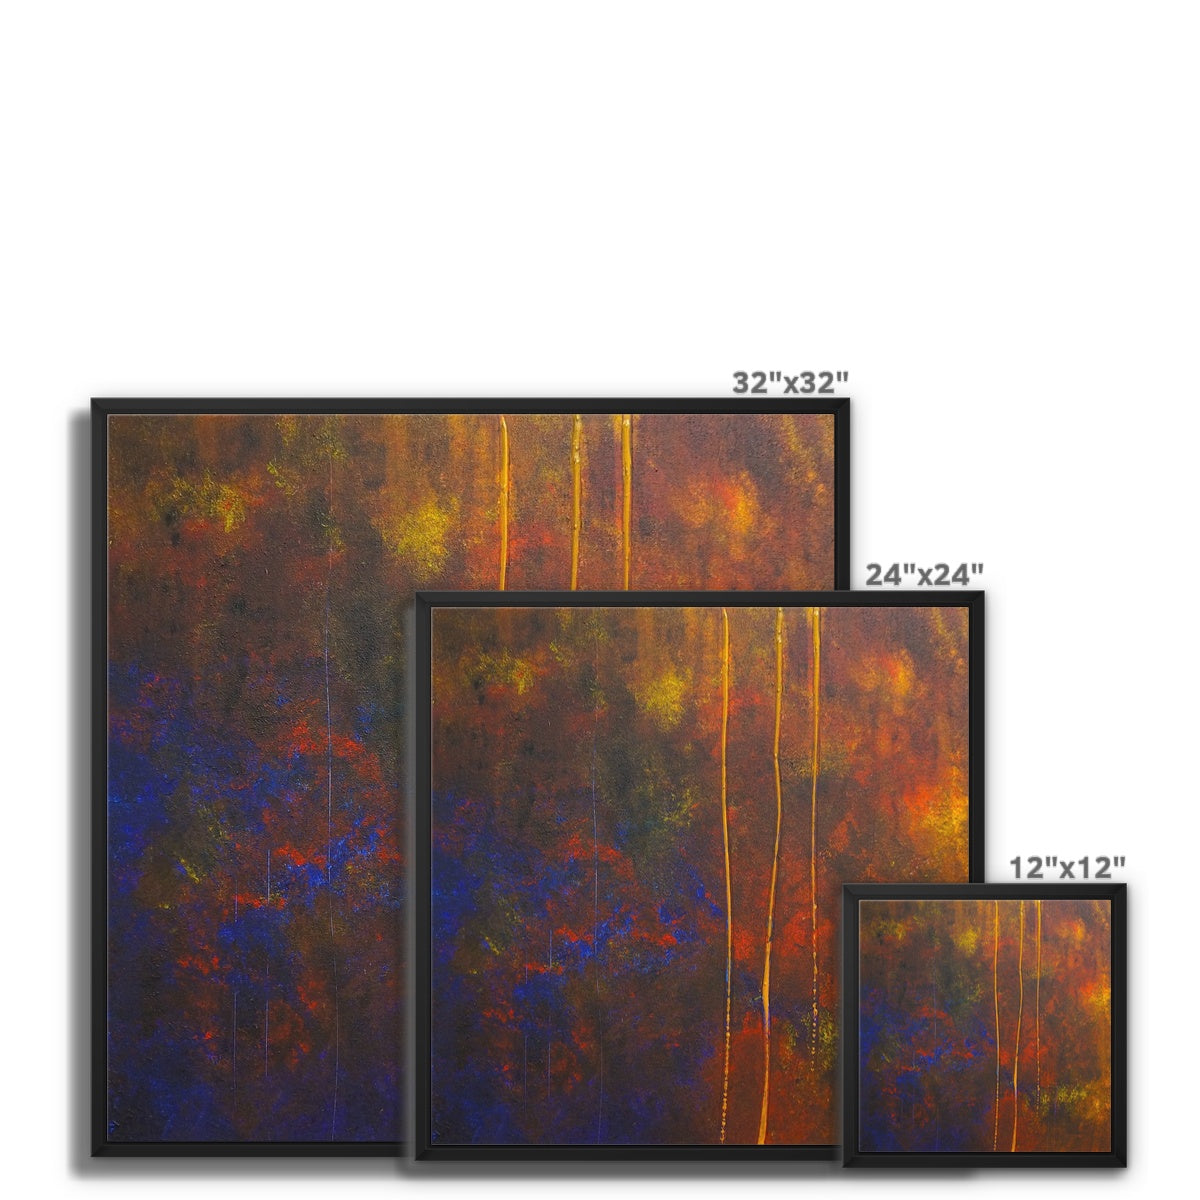 The Autumn Wood Abstract Painting | Framed Canvas From Scotland-Floating Framed Canvas Prints-Abstract & Impressionistic Art Gallery-Paintings, Prints, Homeware, Art Gifts From Scotland By Scottish Artist Kevin Hunter